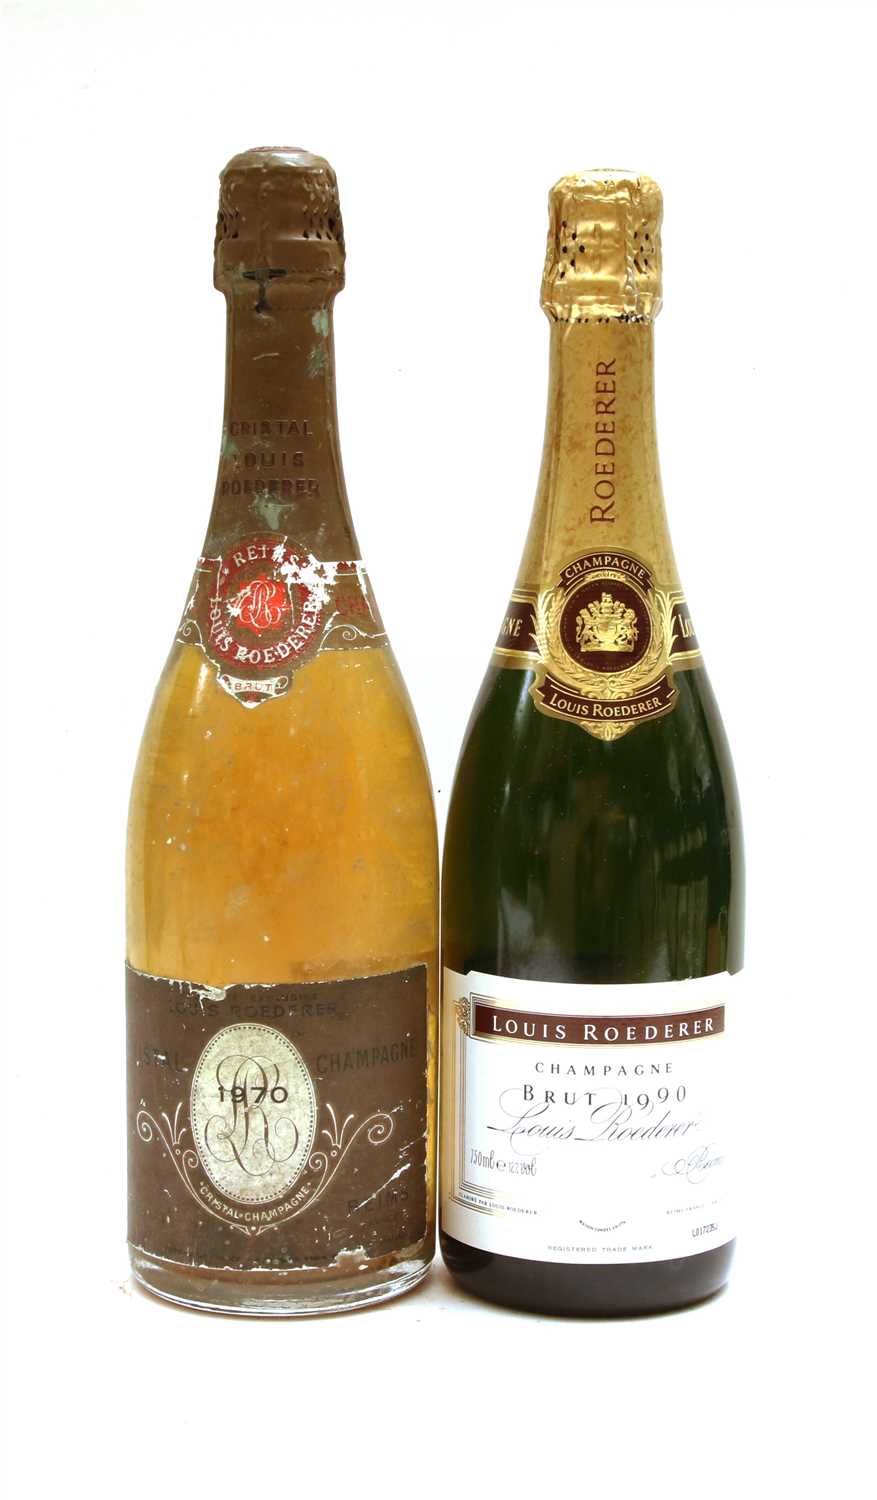 Lot 64 - Assorted Louis Roederer champagne: Brut, 1990, one bottle (boxed) and Cristal, 1970, one bottle